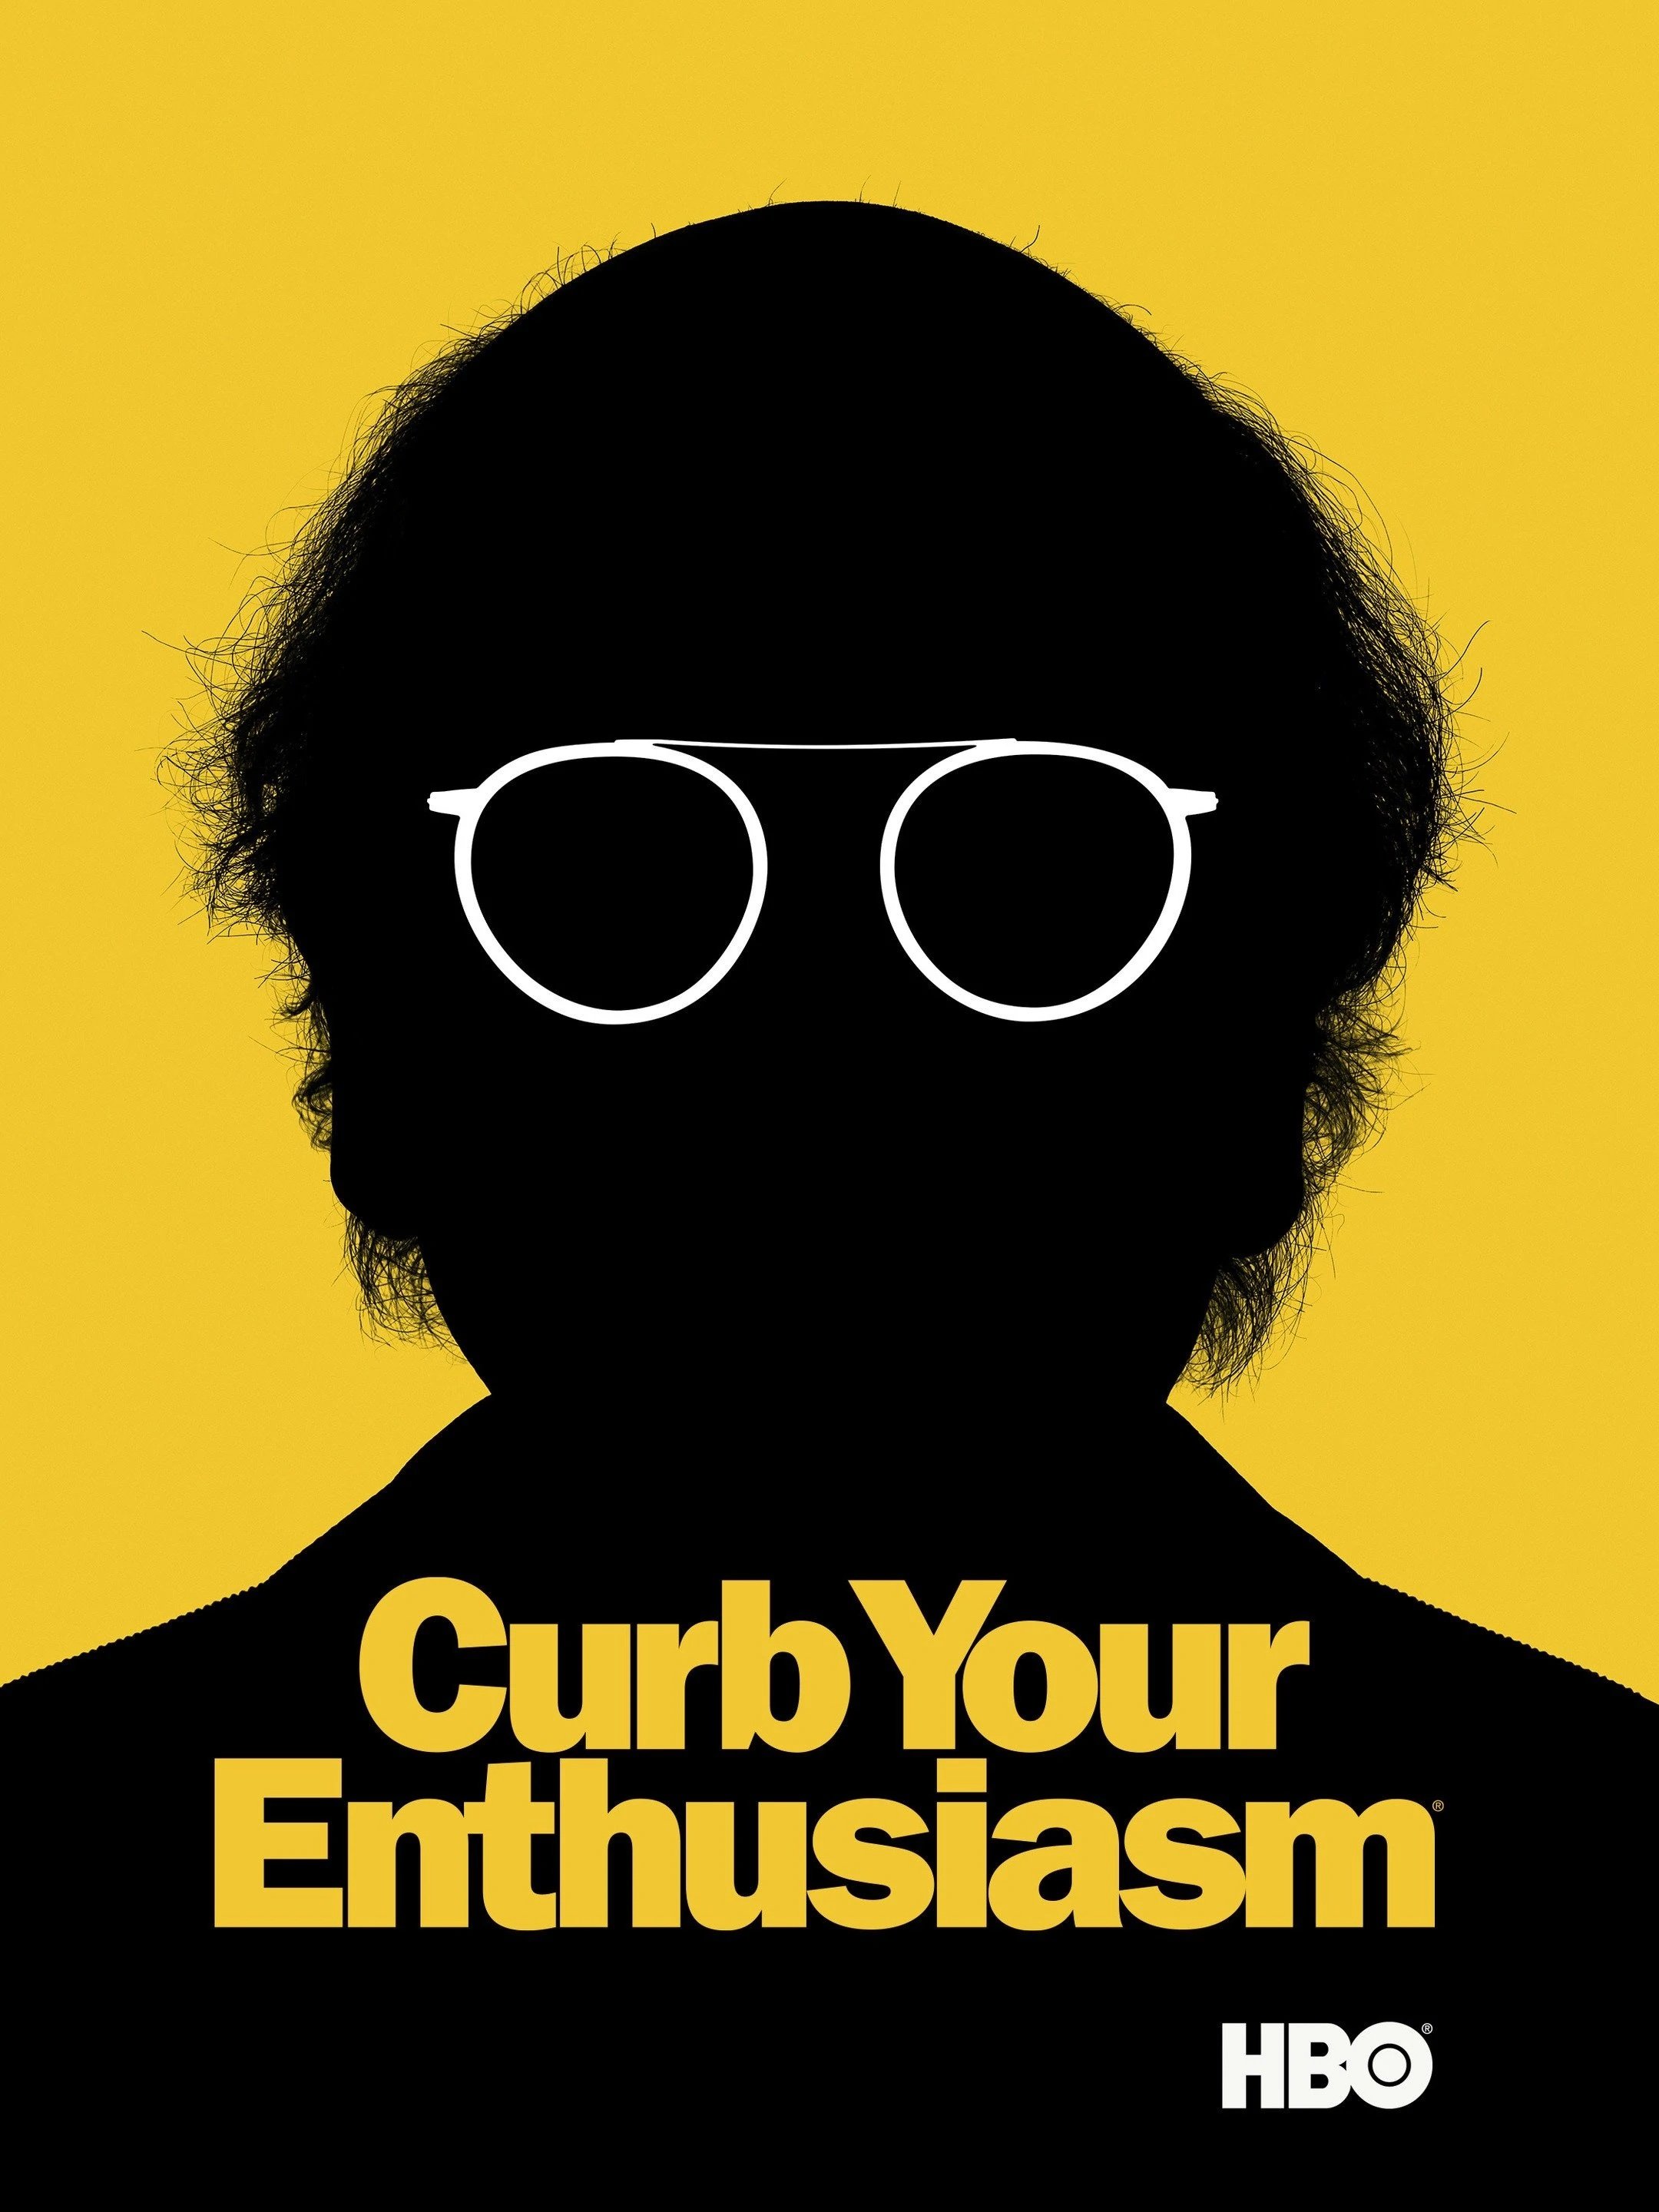 Curb_Your_Enthusiasm_poster.jpg